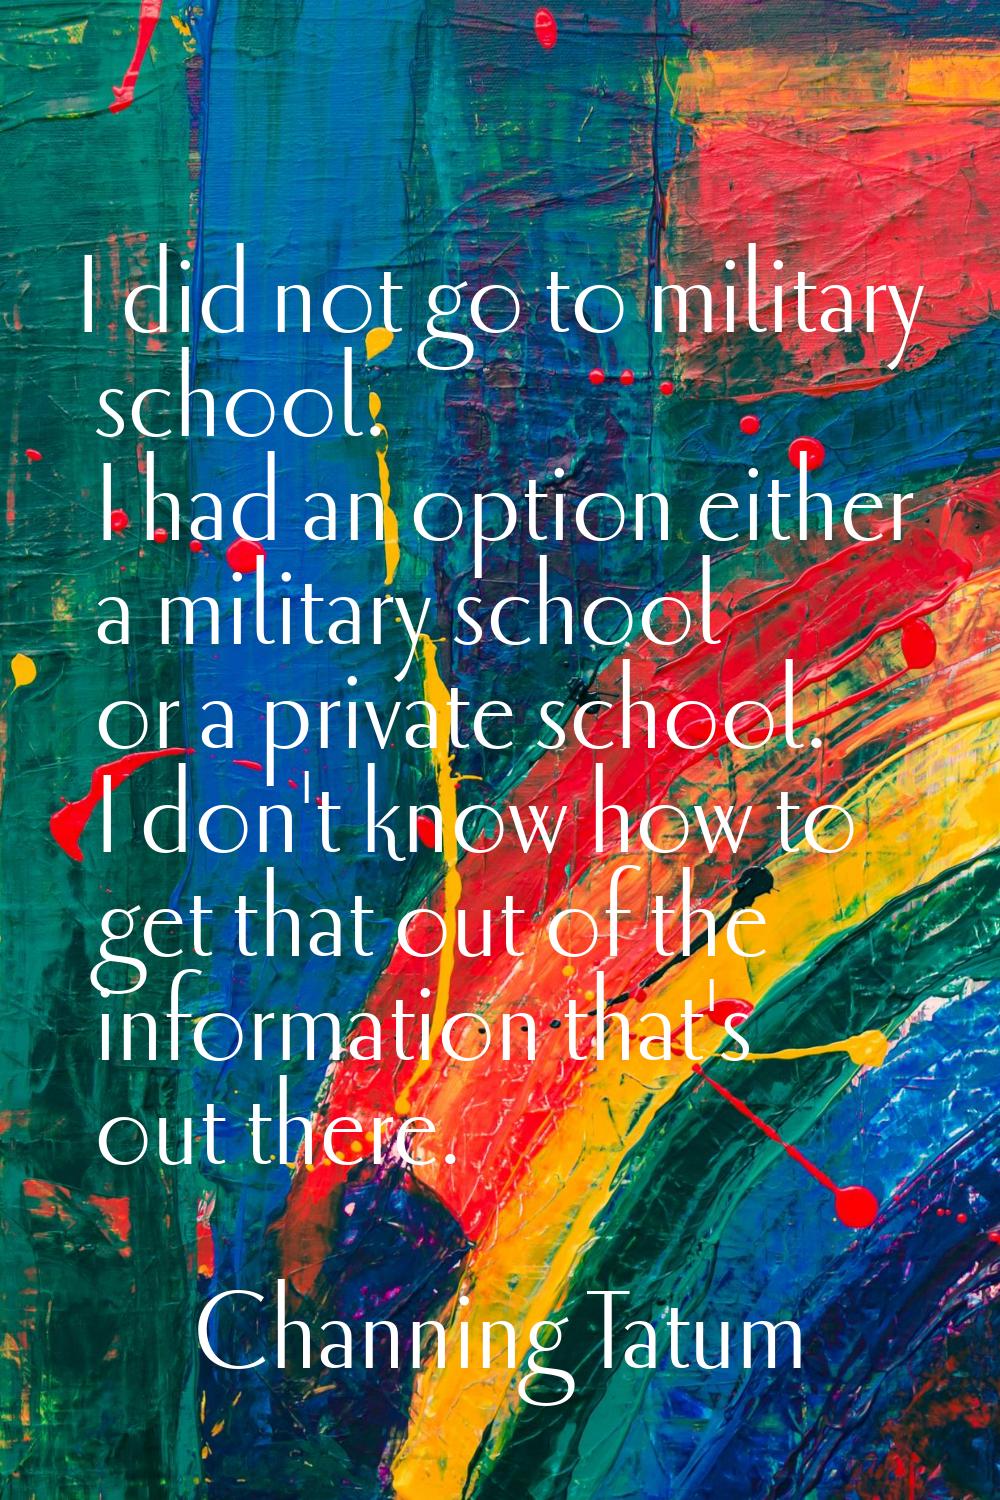 I did not go to military school. I had an option either a military school or a private school. I do